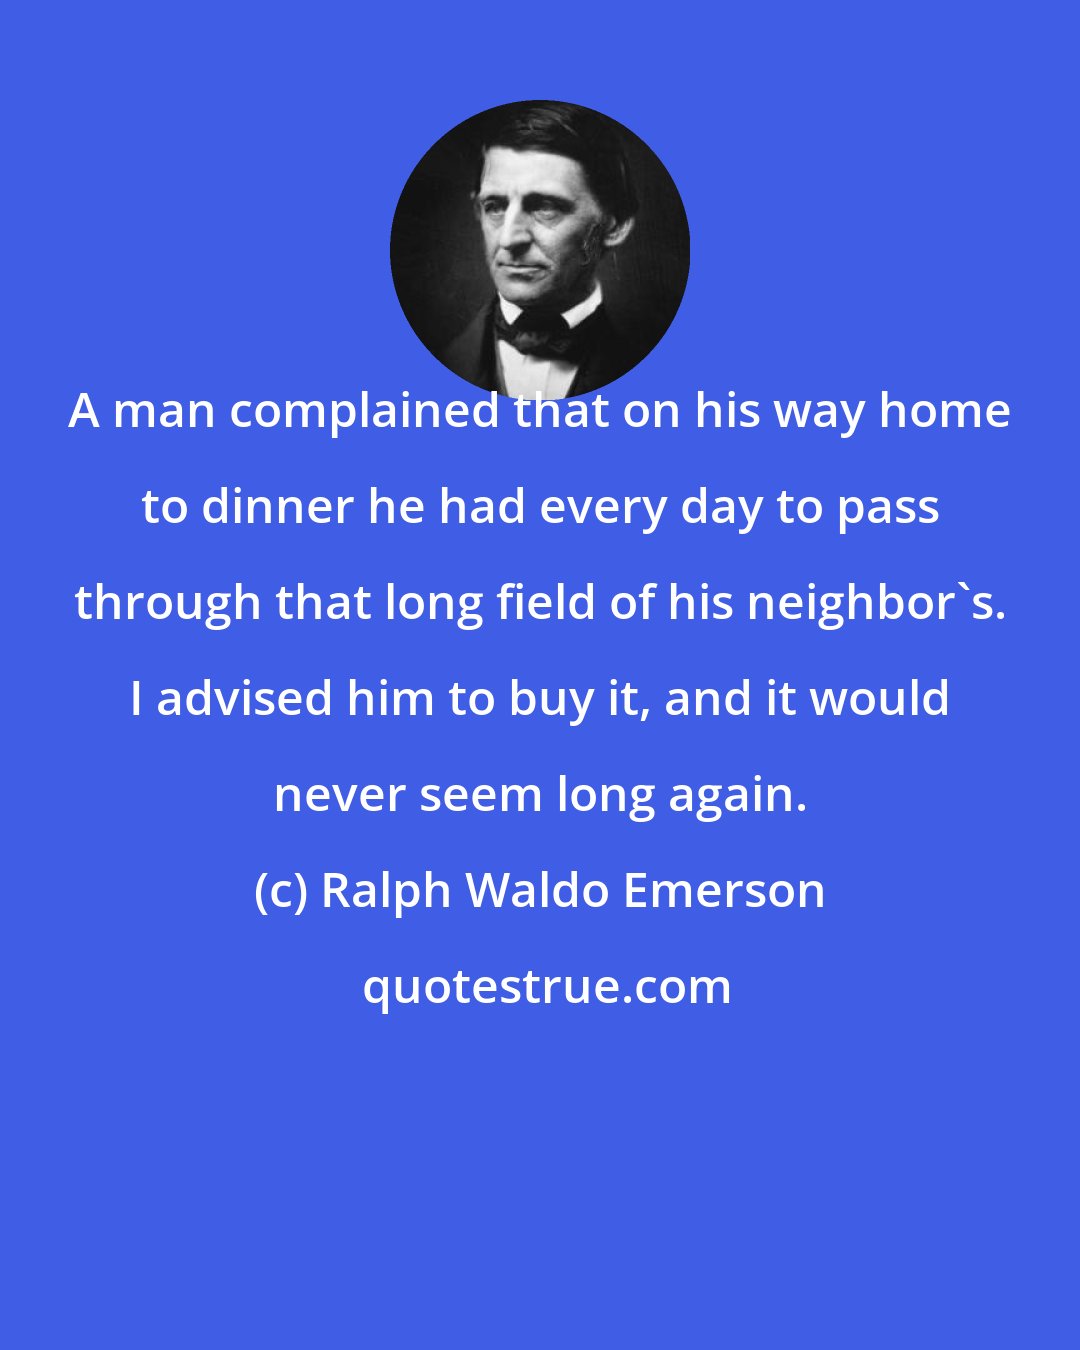 Ralph Waldo Emerson: A man complained that on his way home to dinner he had every day to pass through that long field of his neighbor's. I advised him to buy it, and it would never seem long again.